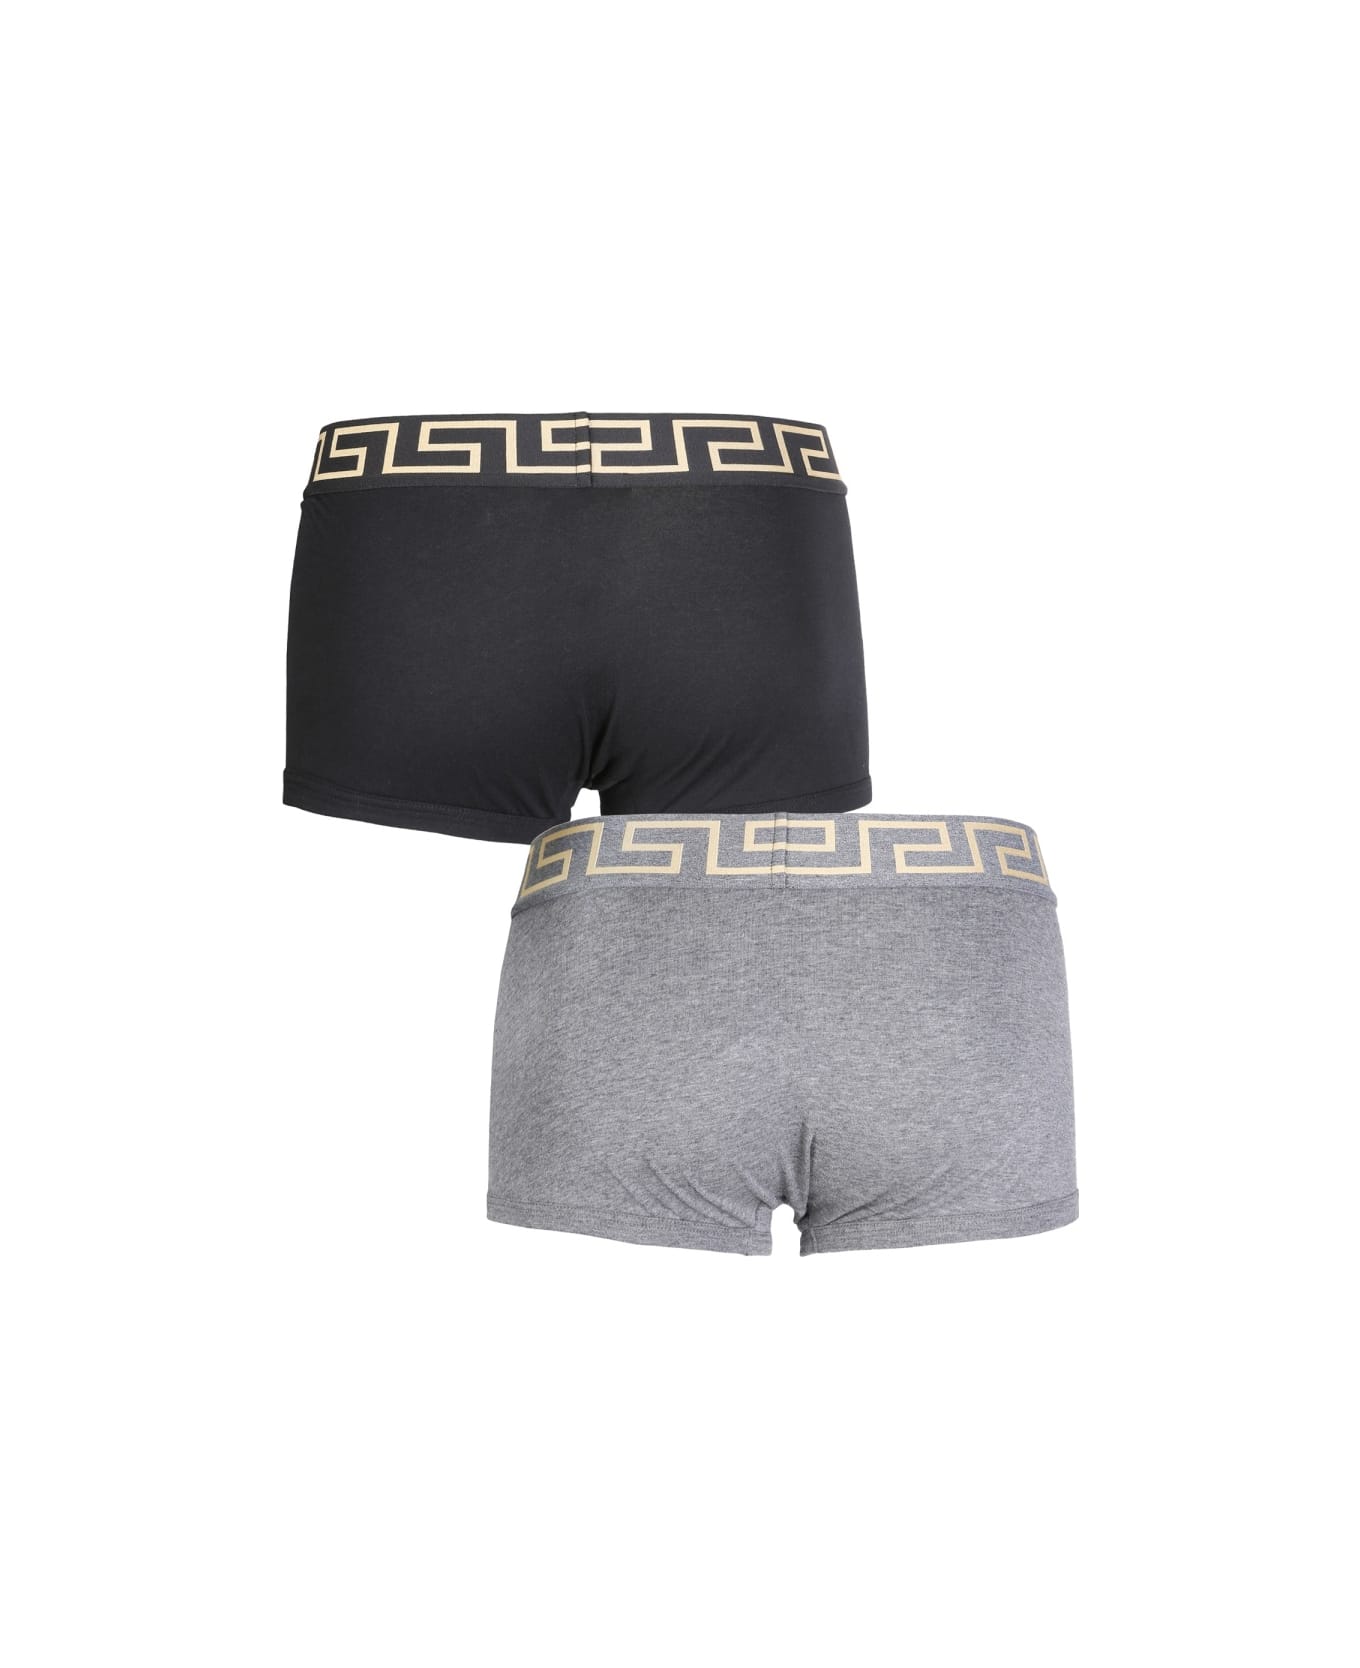 Versace Pack Of Two Boxer Shorts With Greek - MULTICOLOUR